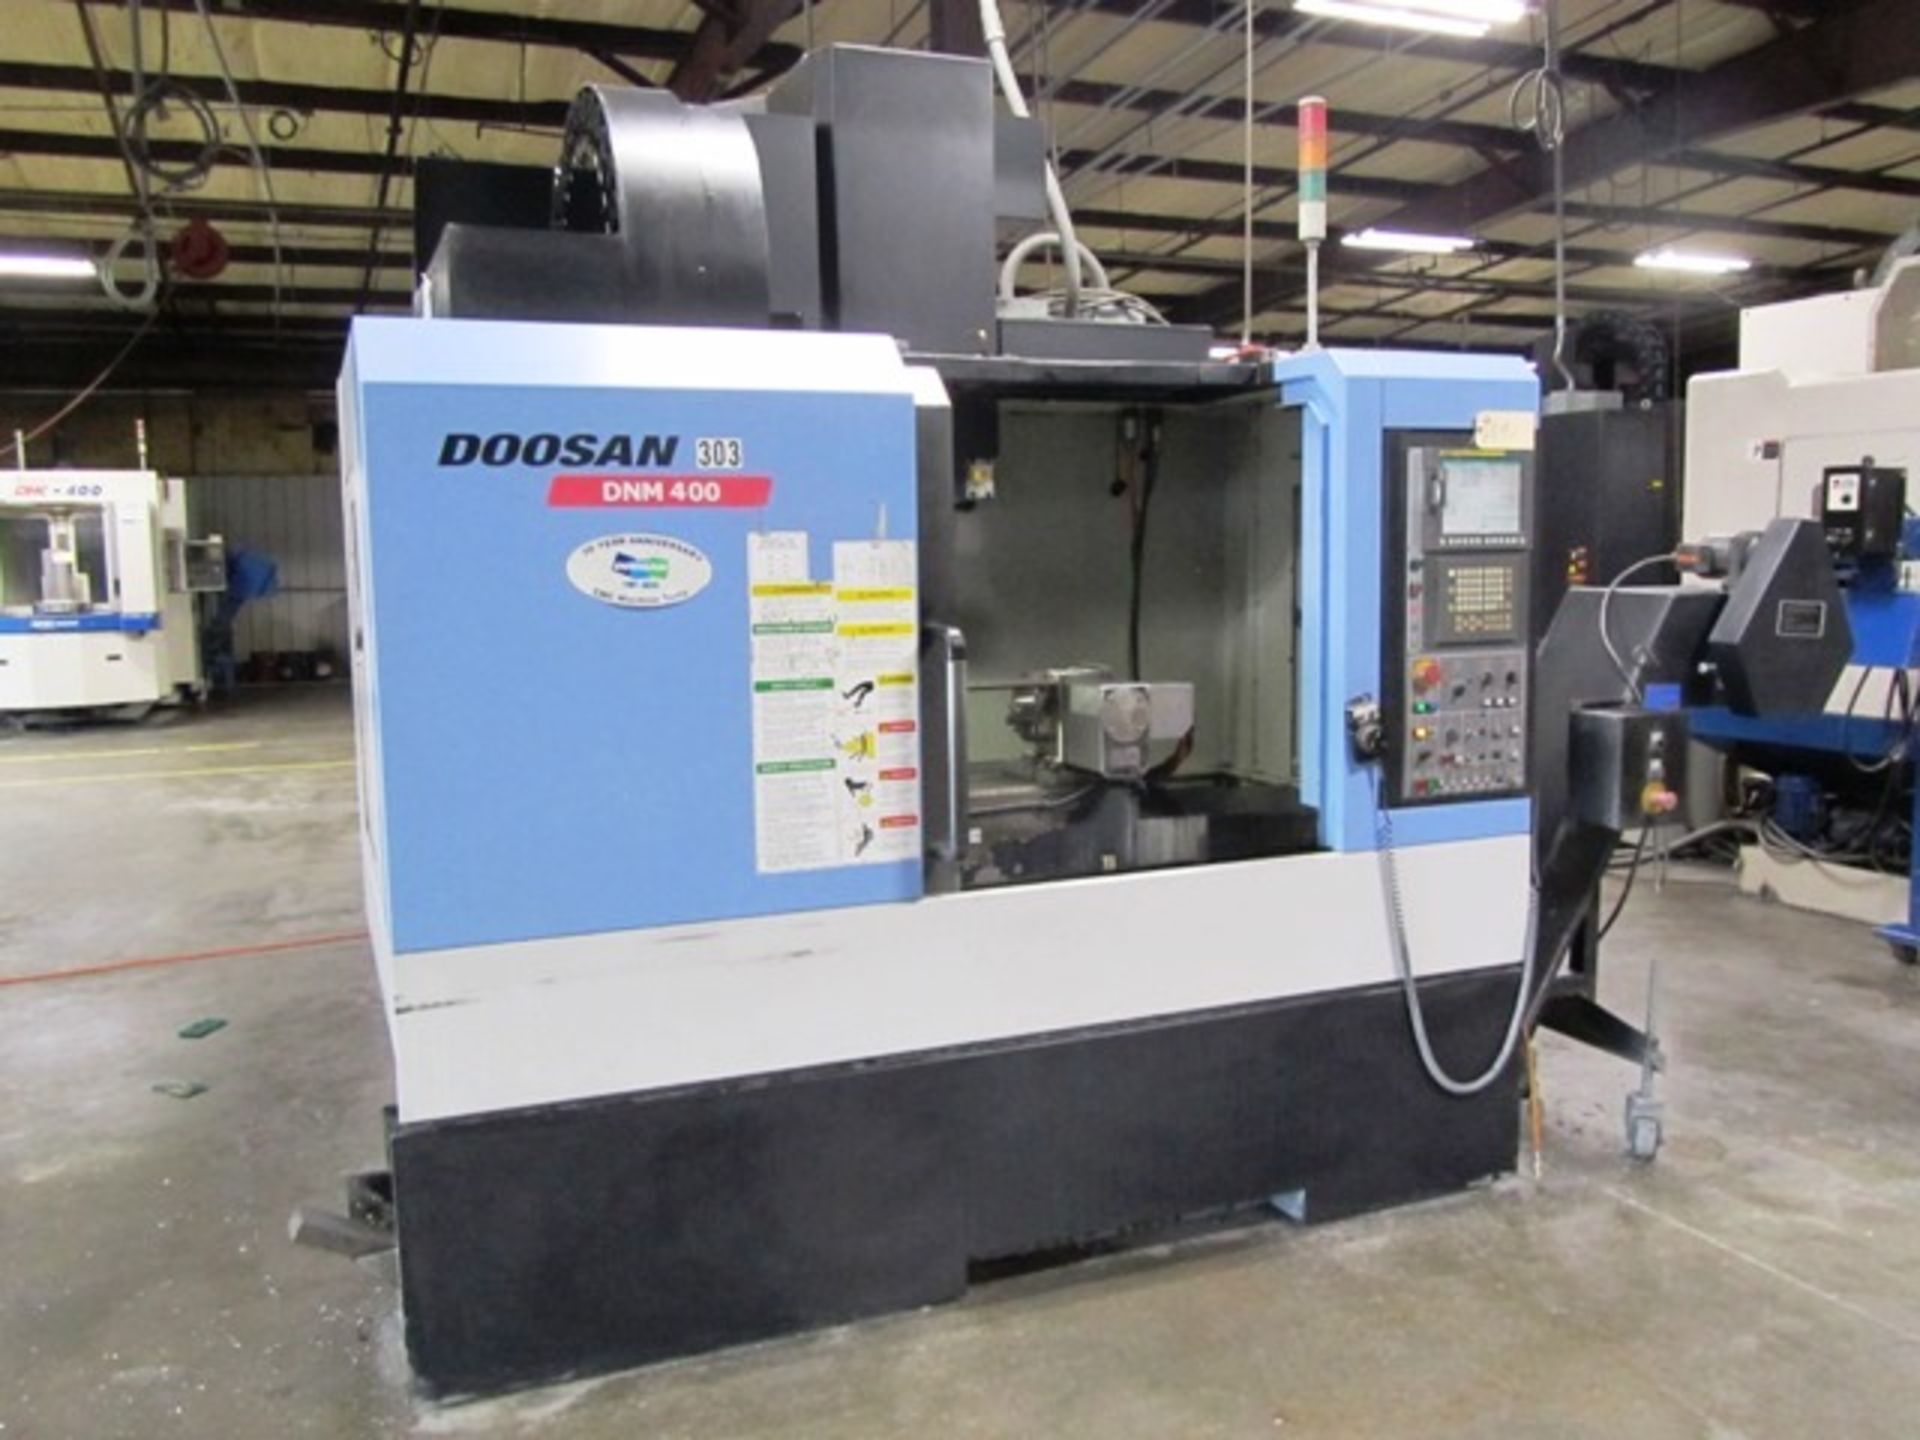 Doosan DNM 400 4-Axis CNC Vertical Machining Center with 6'' & 8'' Tsudakoma 4th Axis Rotary Tables, - Image 3 of 4